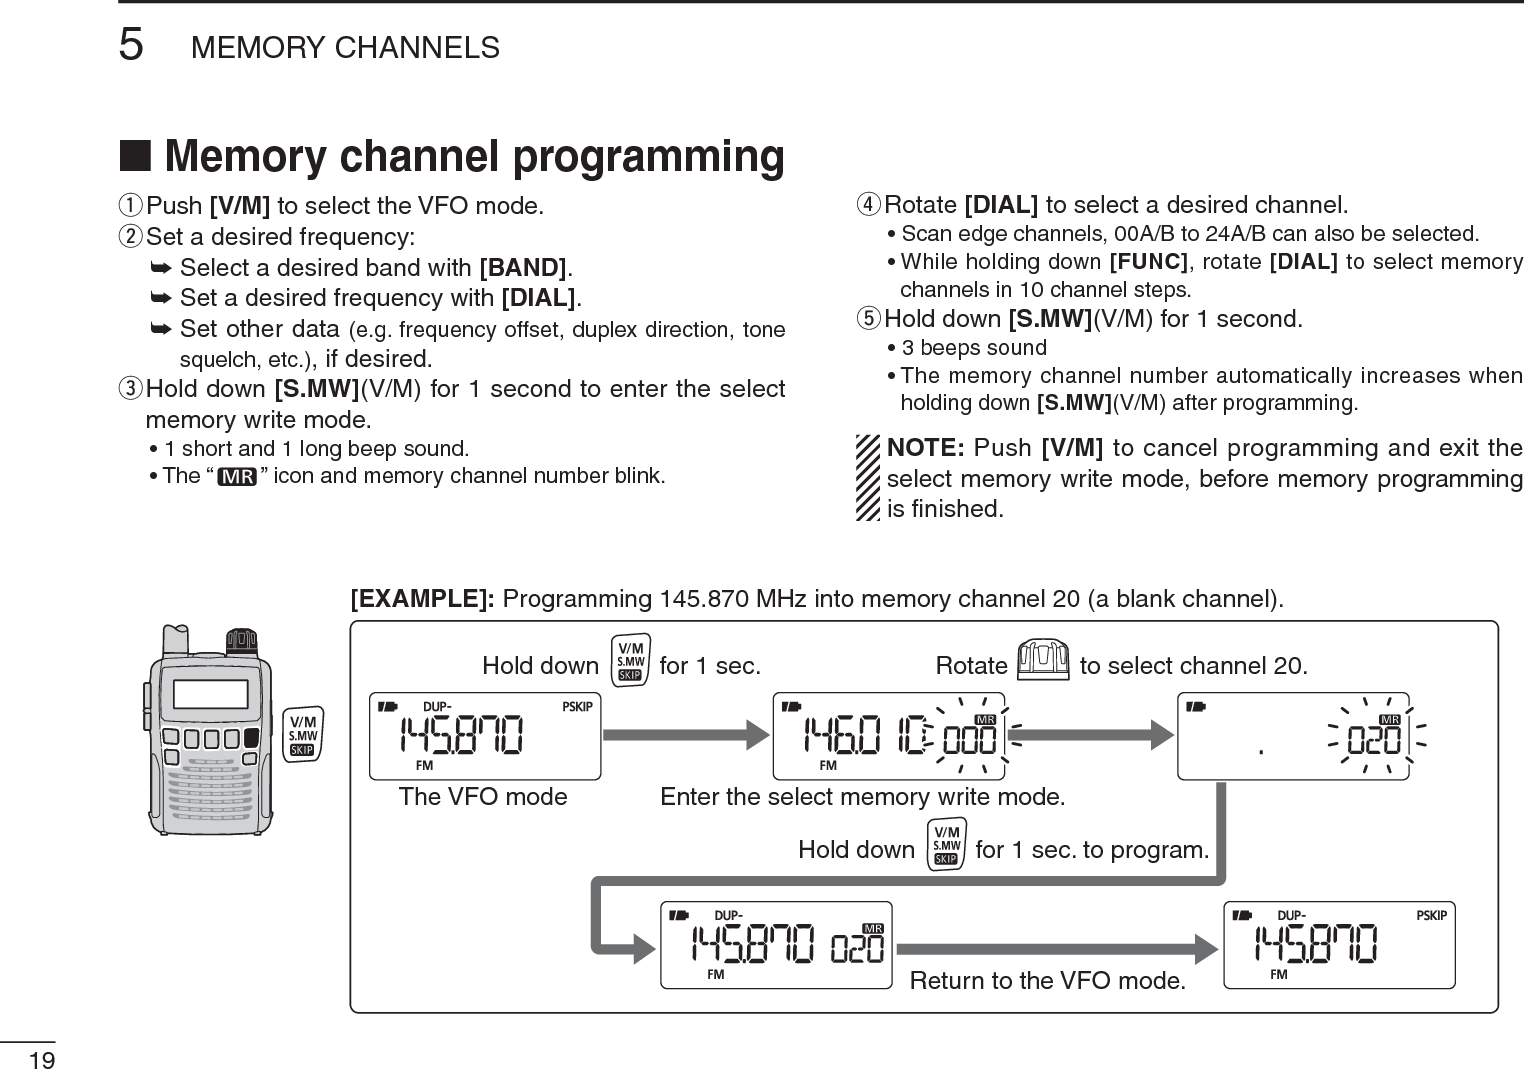 195MEMORY CHANNELSNMemory channel programmingqPush [V/M] to select the VFO mode.wSet a desired frequency:± Select a desired band with [BAND].± Set a desired frequency with [DIAL].±Set other data (e.g. frequency offset, duplex direction, tone squelch, etc.), if desired.e  Hold down [S.MW](V/M) for 1 second to enter the select memory write mode.• 1 short and 1 long beep sound.• The “ ” icon and memory channel number blink.rRotate [DIAL] to select a desired channel.• Scan edge channels, 00A/B to 24A/B can also be selected.• While holding down [FUNC], rotate [DIAL] to select memory channels in 10 channel steps.tHold down [S.MW](V/M) for 1 second.• 3 beeps sound• The memory channel number automatically increases when holding down [S.MW](V/M) after programming.NOTE: Push [V/M] to cancel programming and exit the select memory write mode, before memory programming is ﬁnished.RotateHold down for 1 sec. to select channel 20.Hold down for 1 sec. to program.The VFO mode Enter the select memory write mode.Return to the VFO mode.[EXAMPLE]: Programming 145.870 MHz into memory channel 20 (a blank channel).